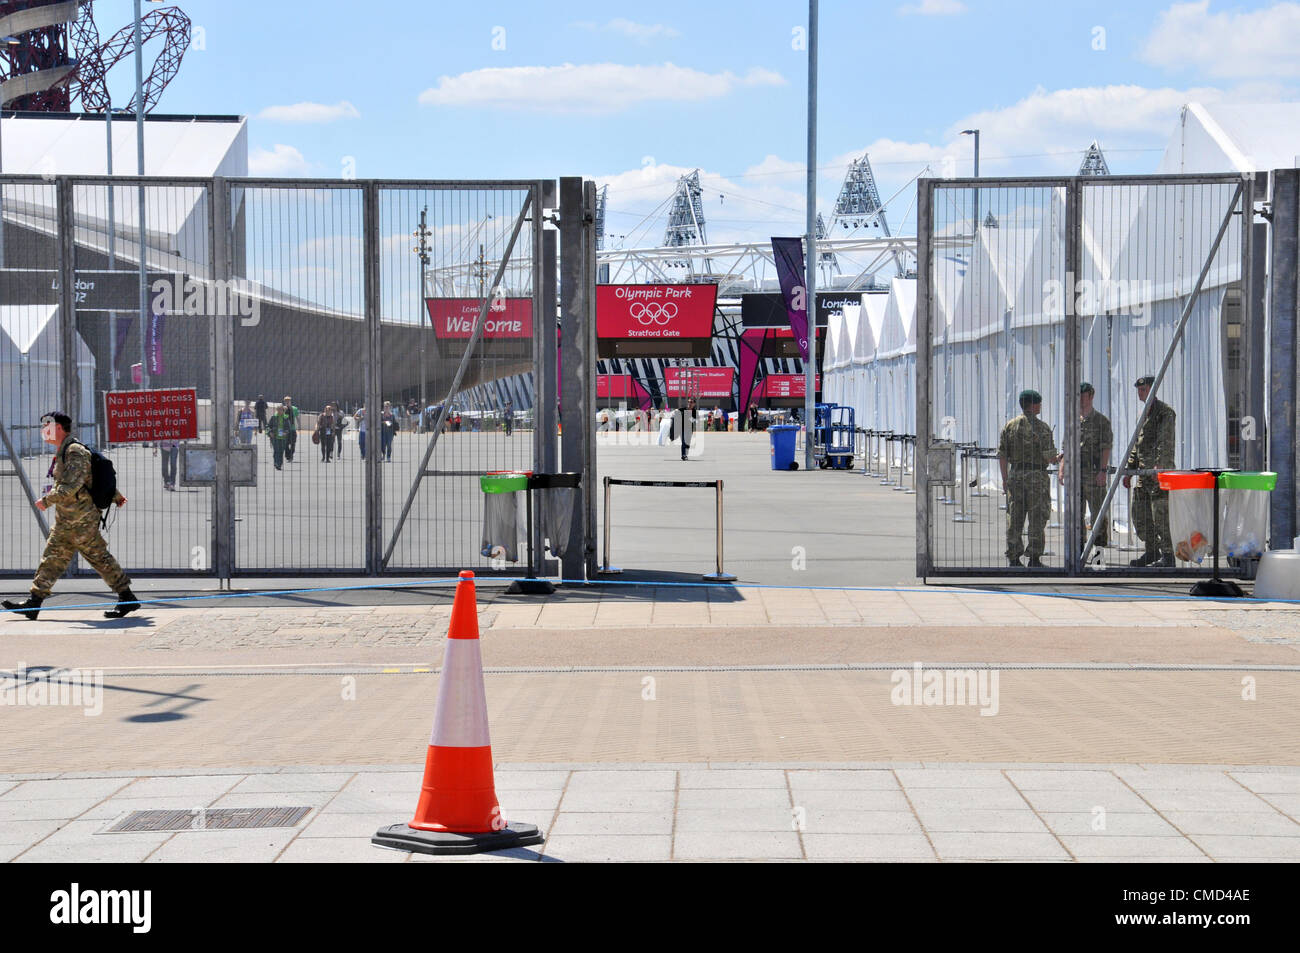 Stratford, London, UK. 22nd July 2012. The Olympic Park has the army acting as additional security due to the poor performance of G4S the private company that was supposed to supply staff for the games but has failed to do so. Credit:  Matthew Chattle / Alamy Live News Stock Photo